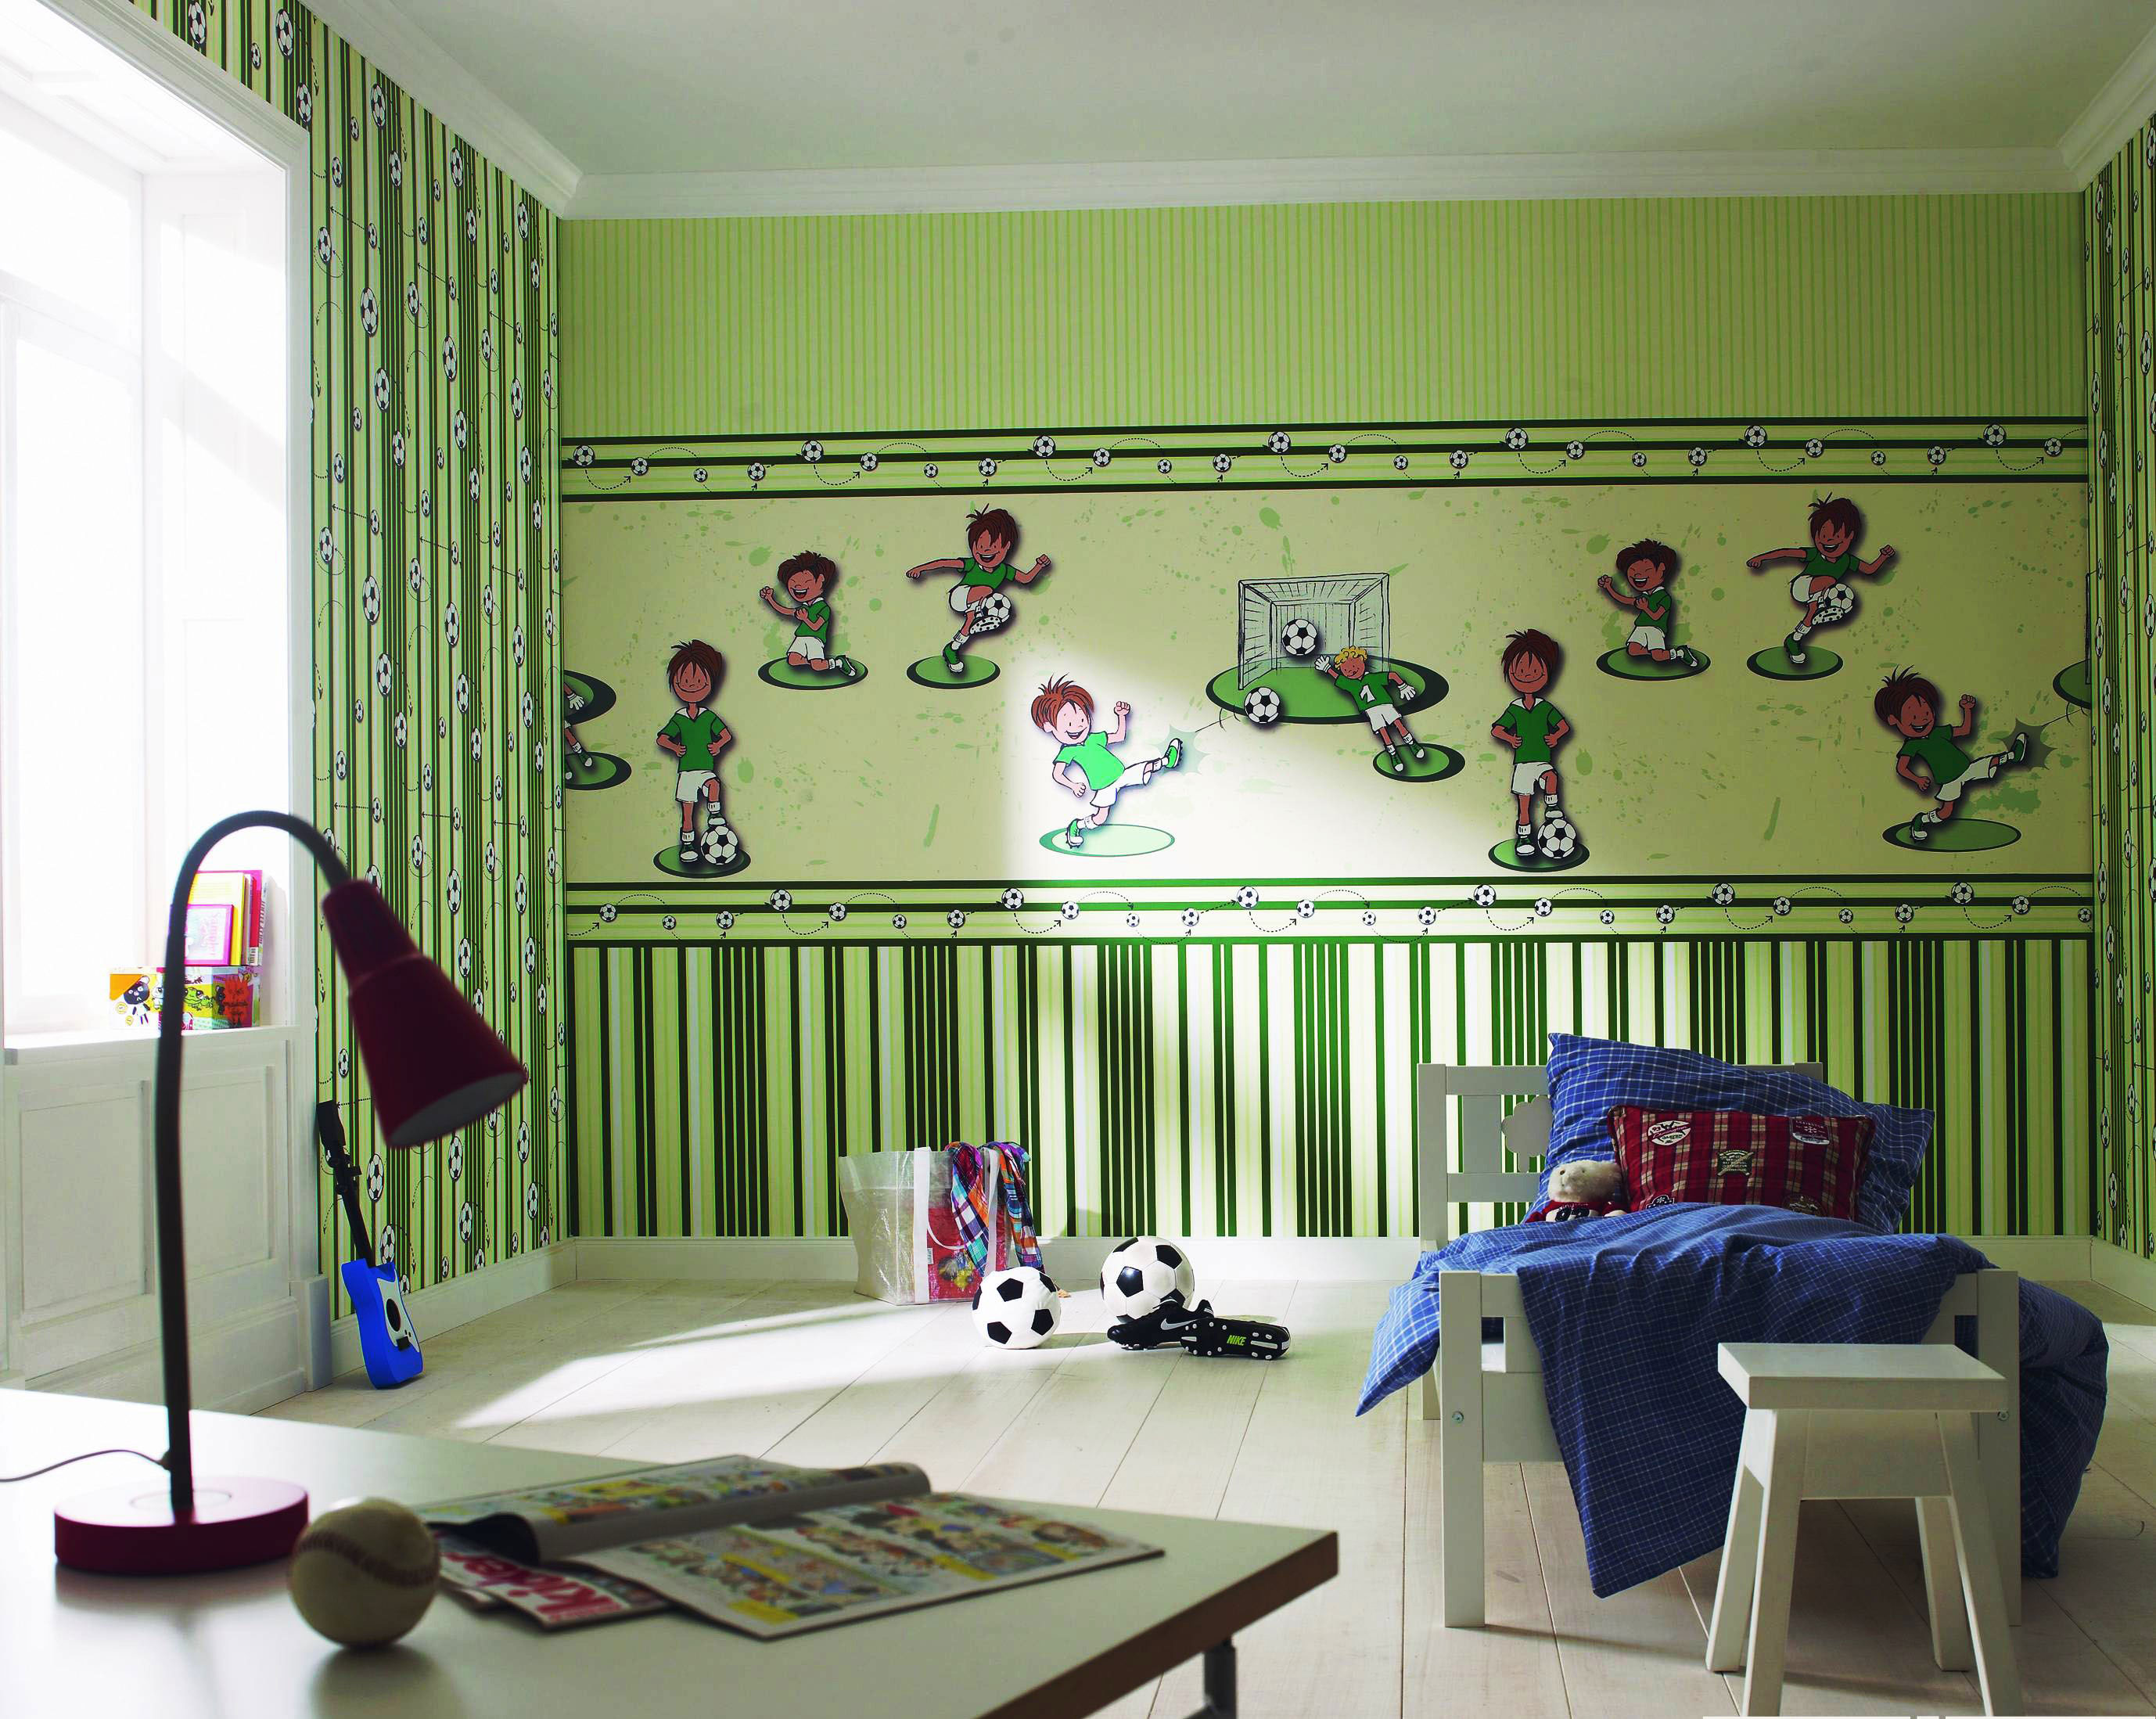 Wall mural with themed sports drawings in a nursery